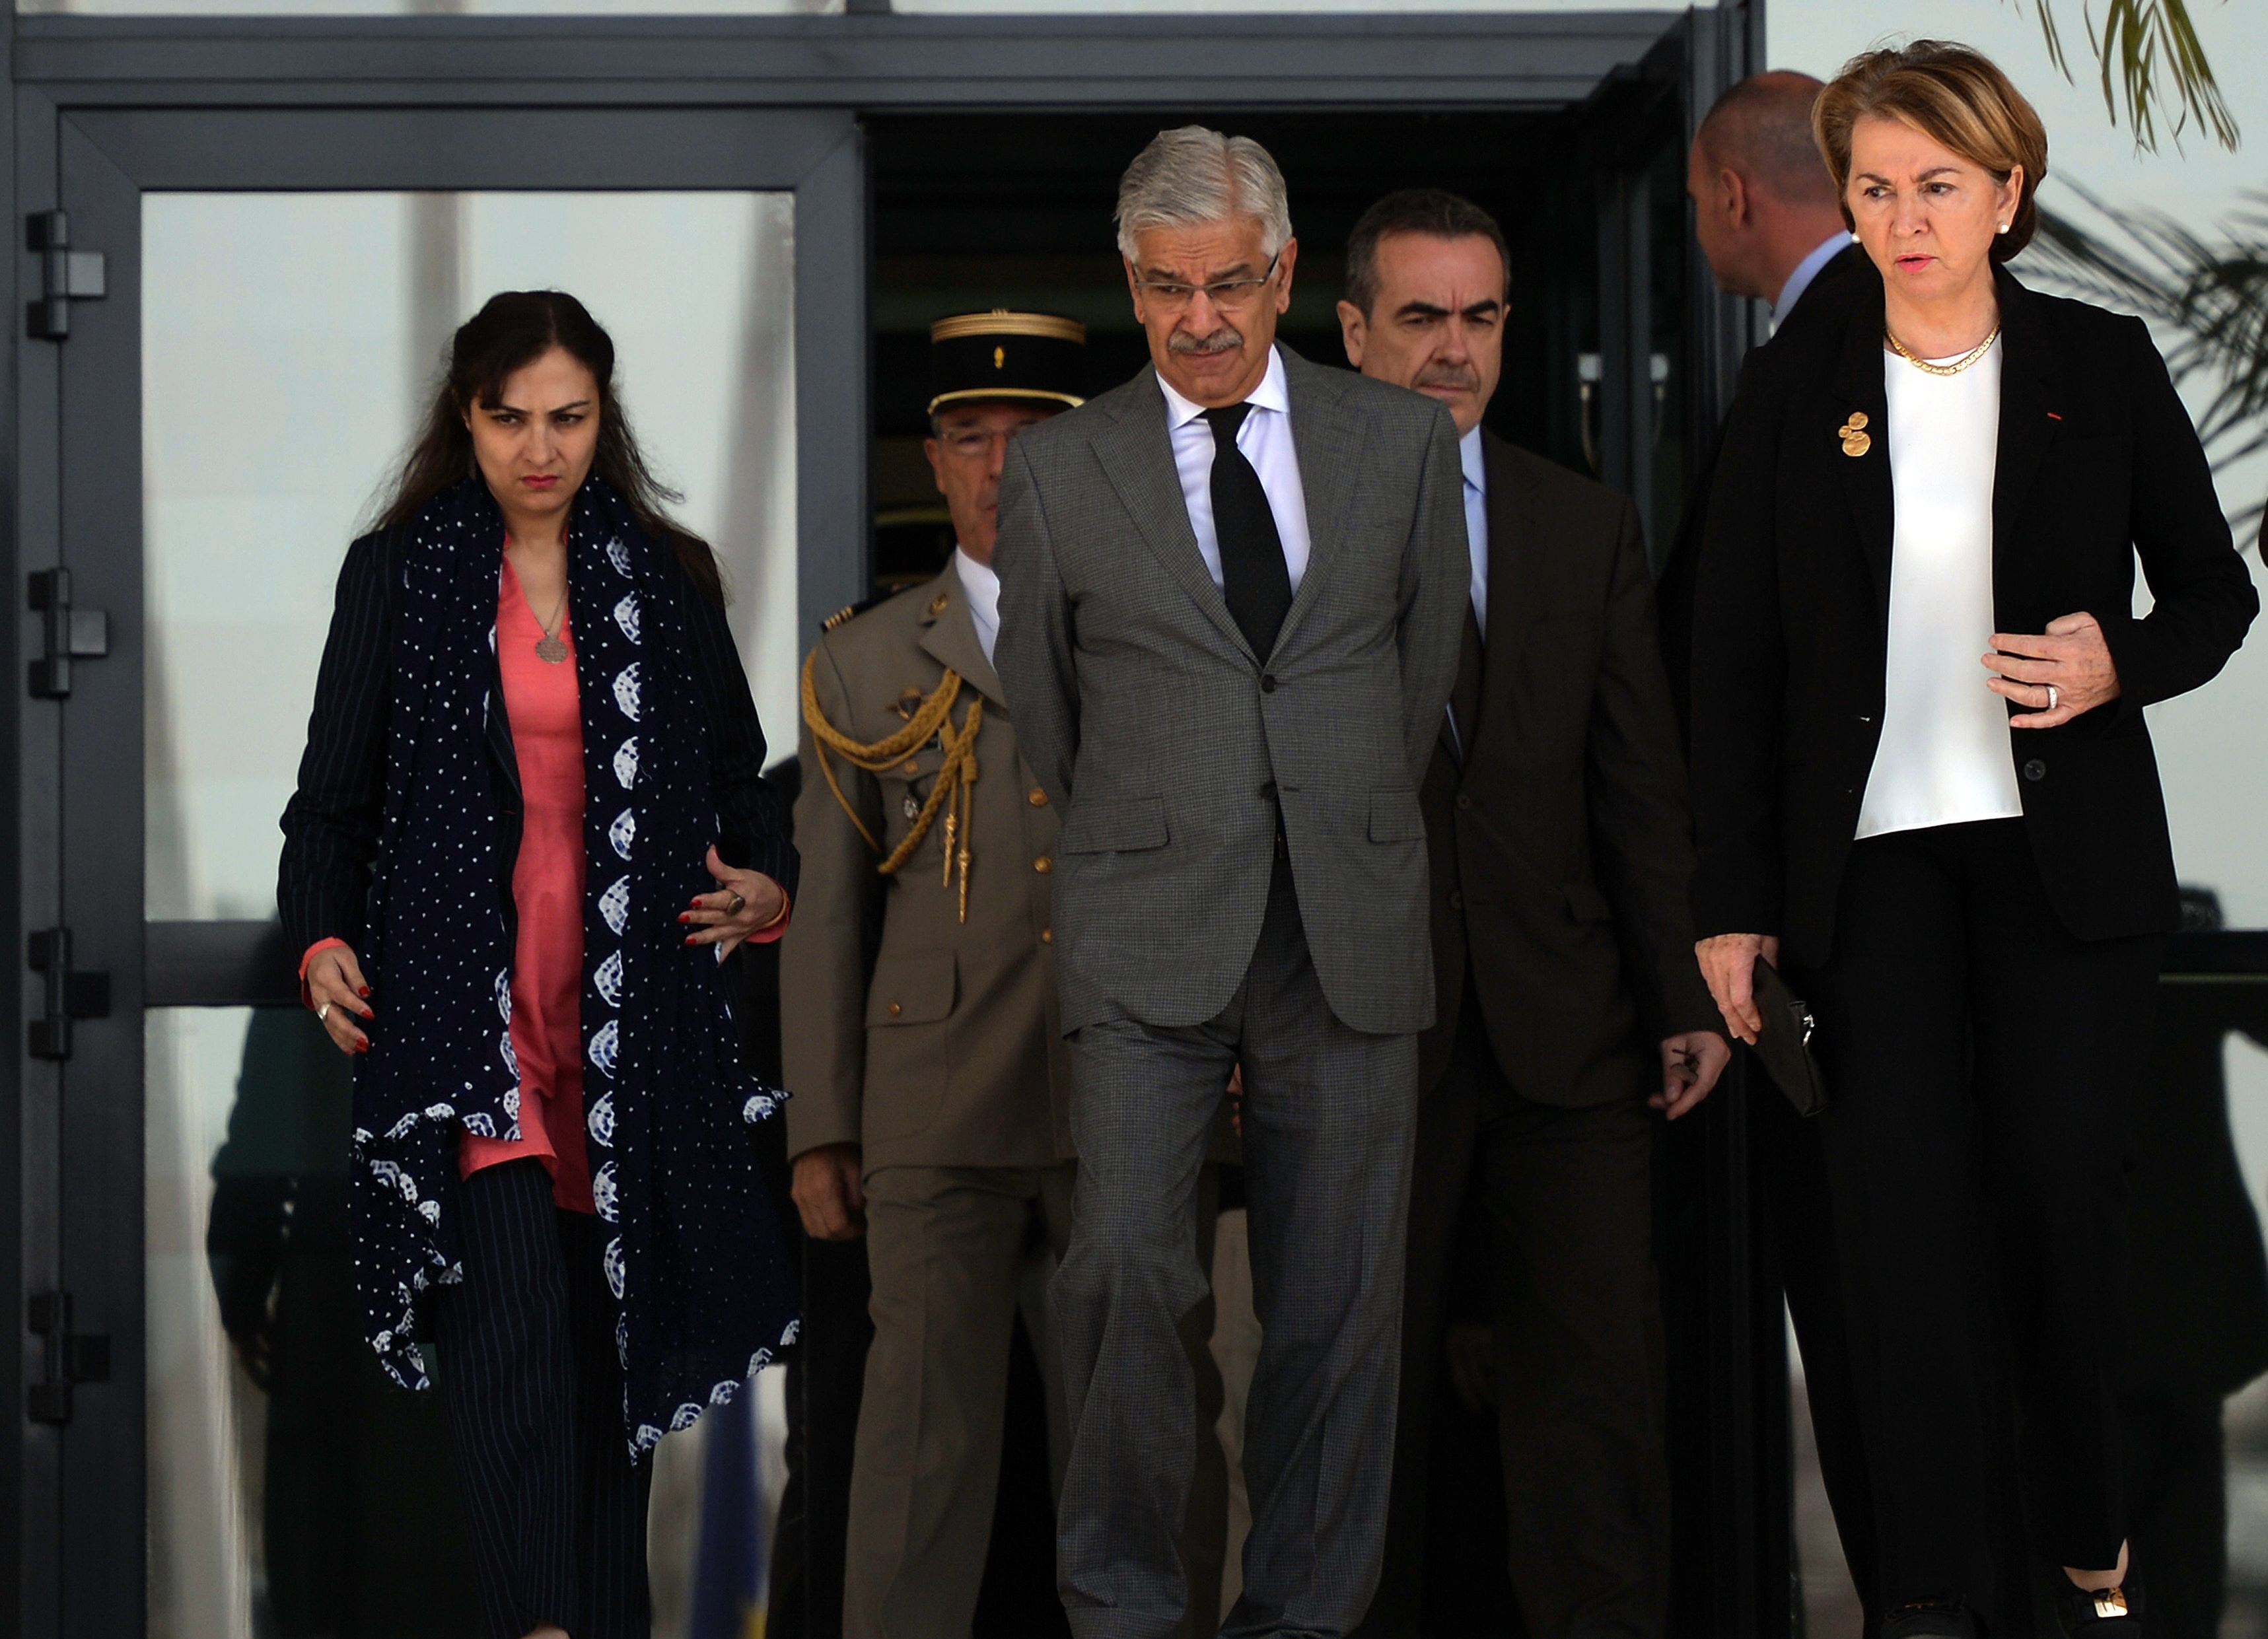 martine dorance r and khawaja asif c arrive to attend a minute of silence in tribute to victims of the november 13 paris attacks at the french embassy in islamabad on november 16 2015 photo afp